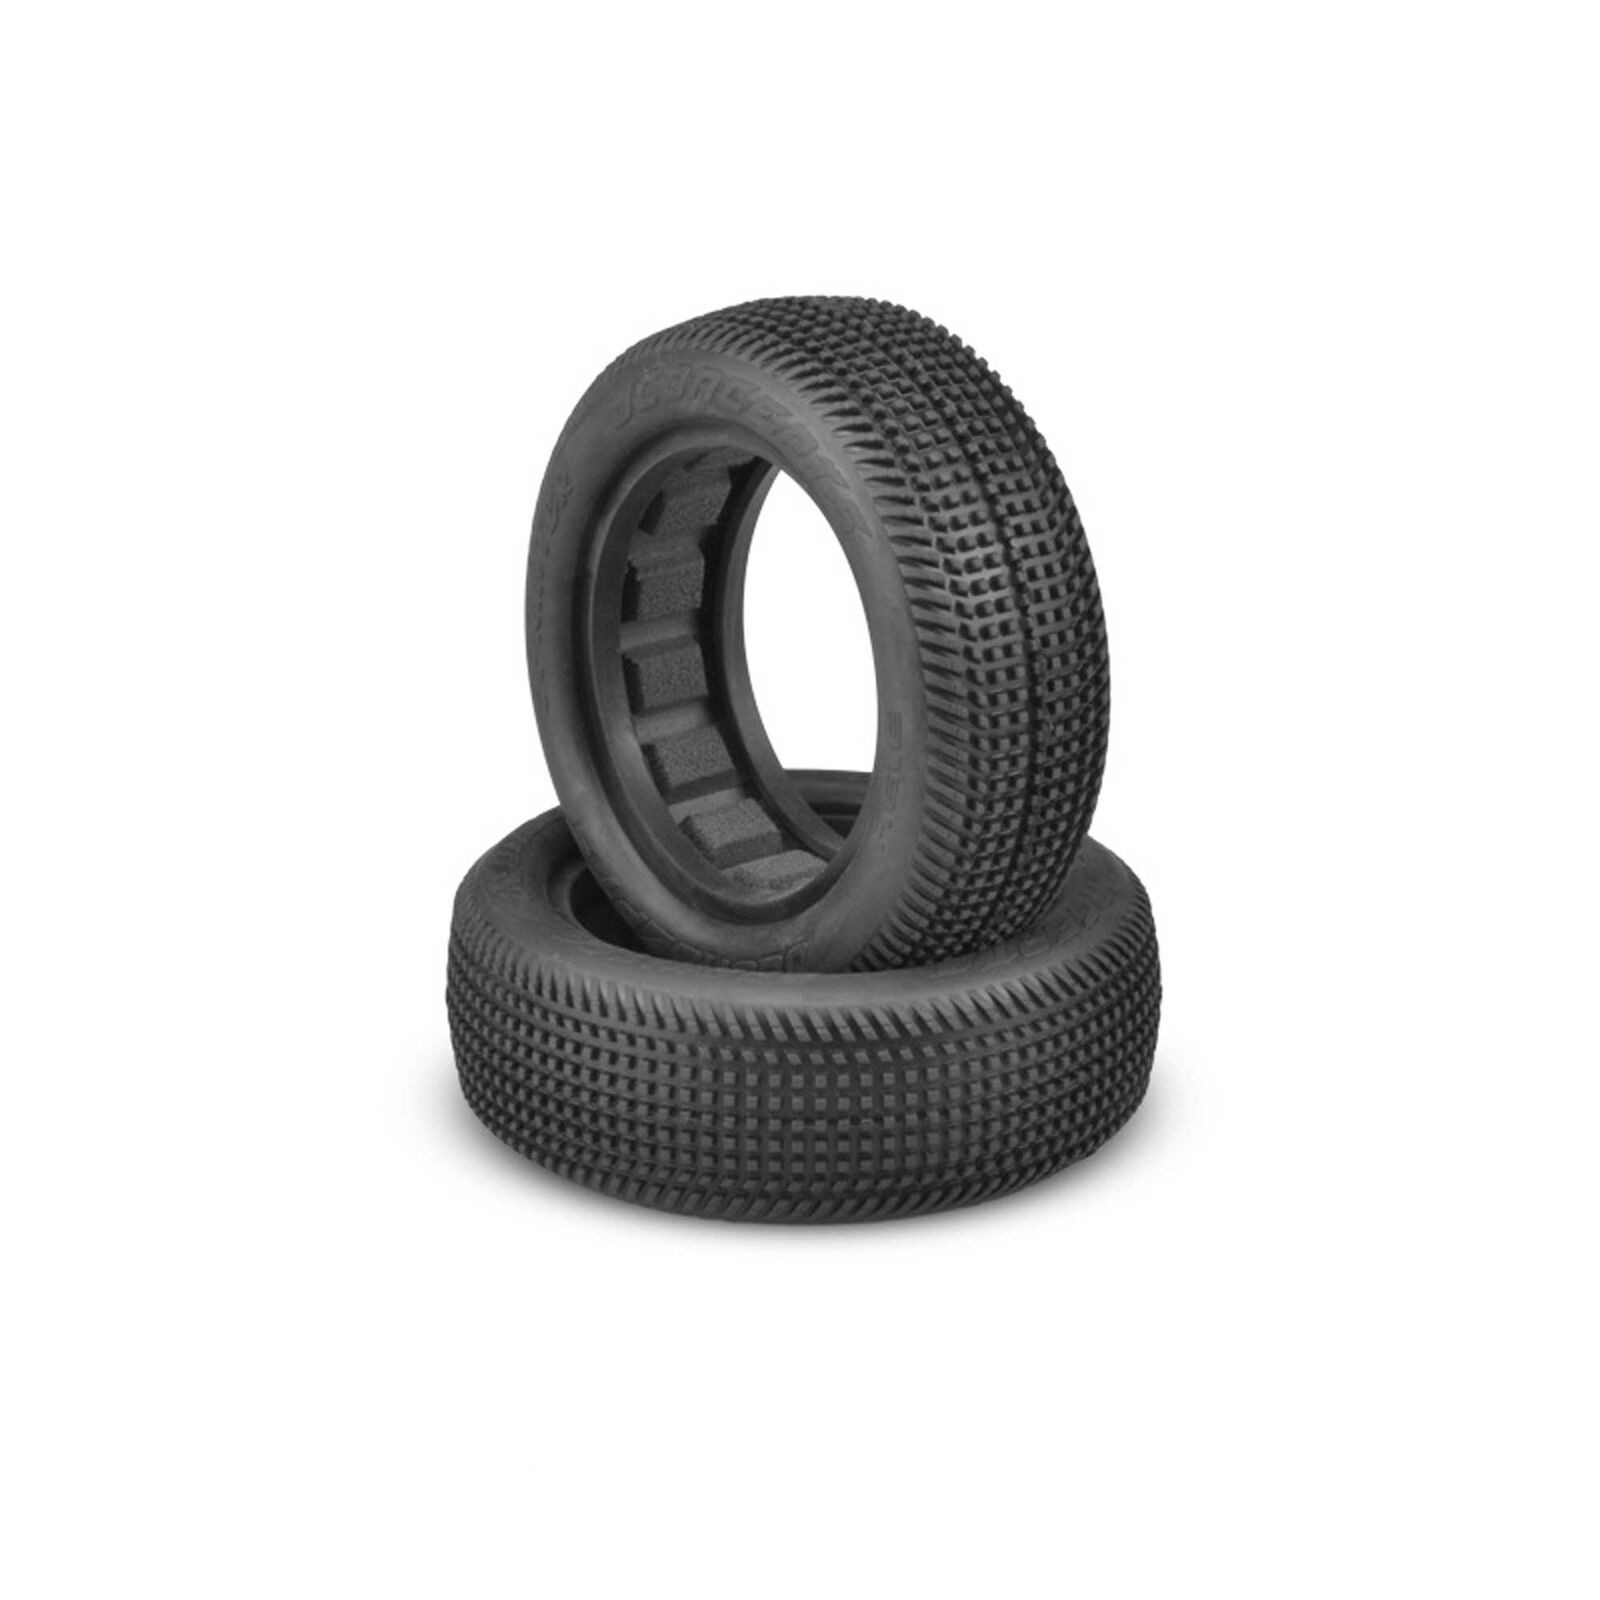 1/10 Sprinter 2.2” Front Buggy Tires and Inserts, Aqua Compound (2)